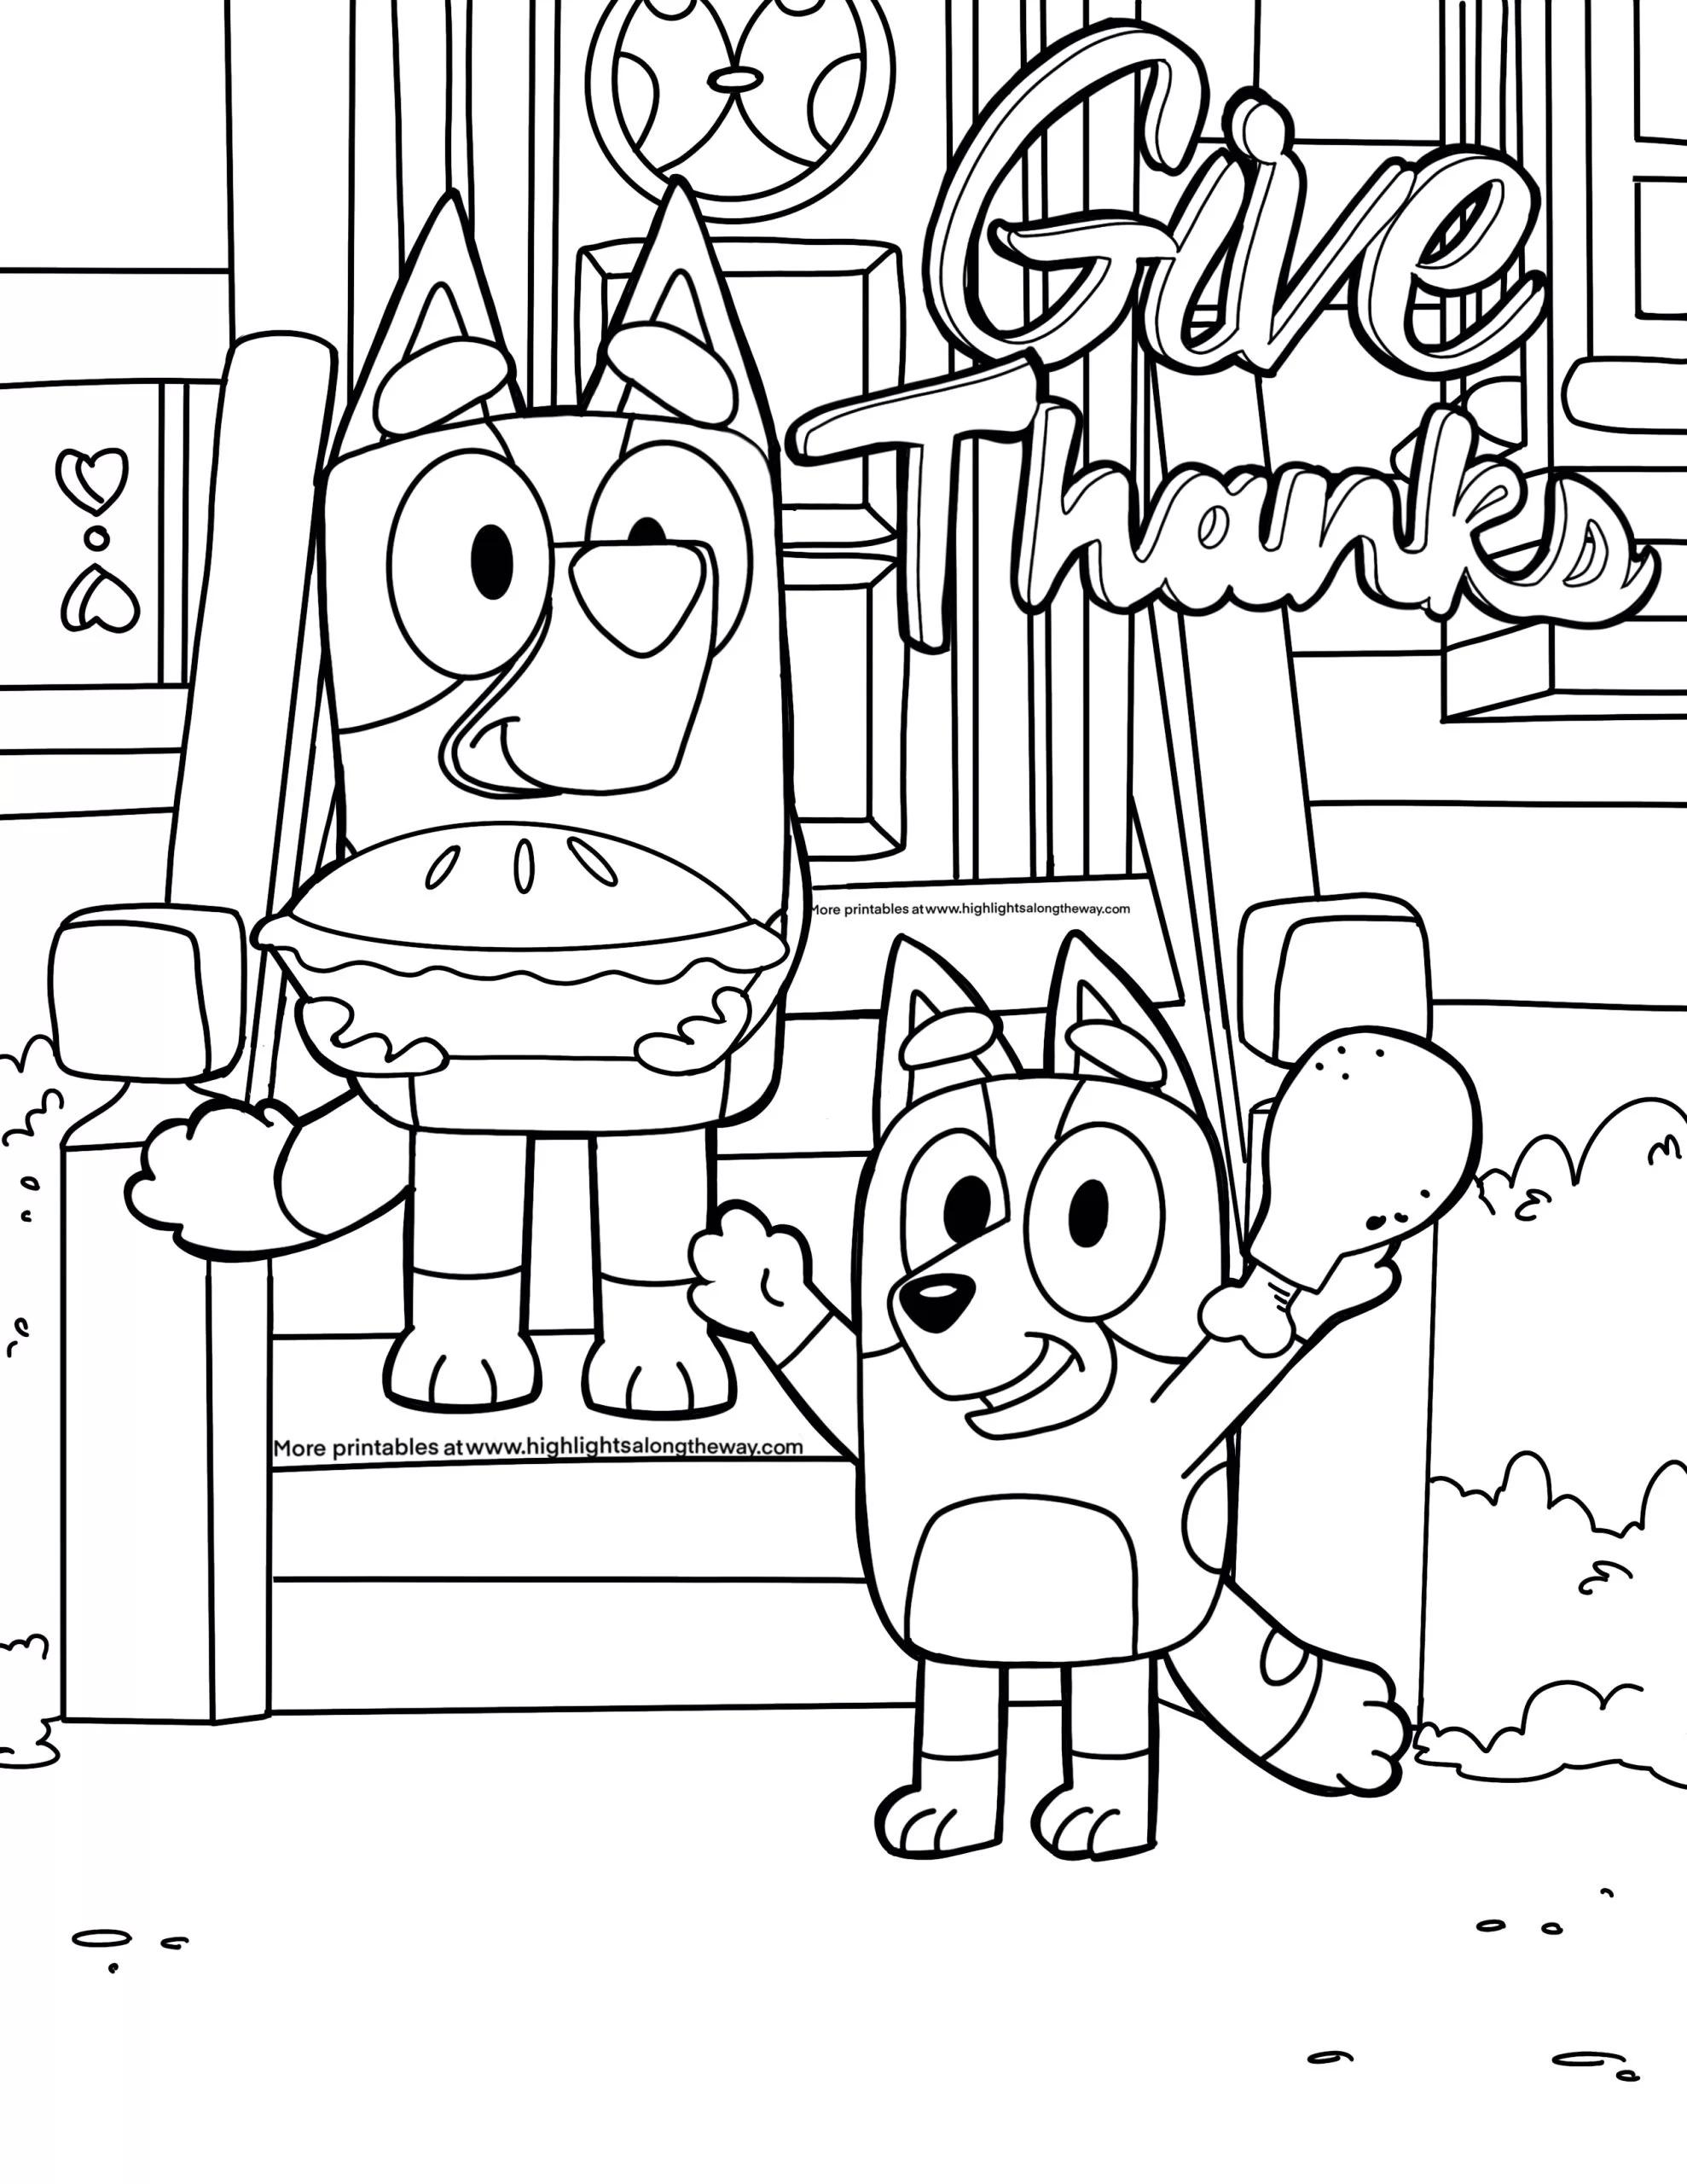 Was looking for Thanksgiving coloring pages to print out and came across  this. It feels so wrong : r/bluey